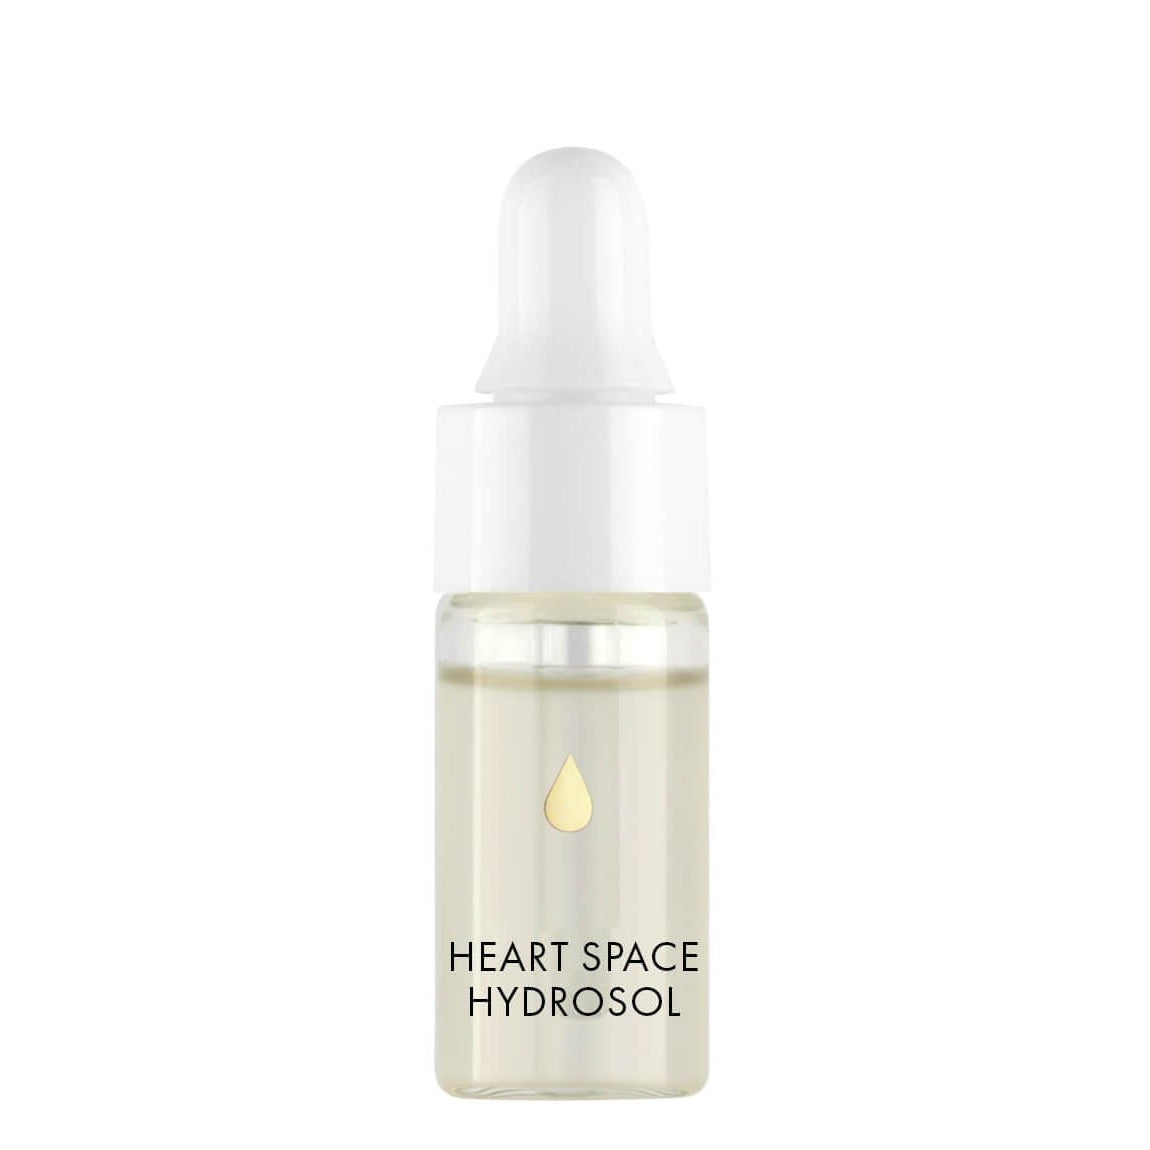 Heart Space Hydrosol Sample Synthesis Organics 